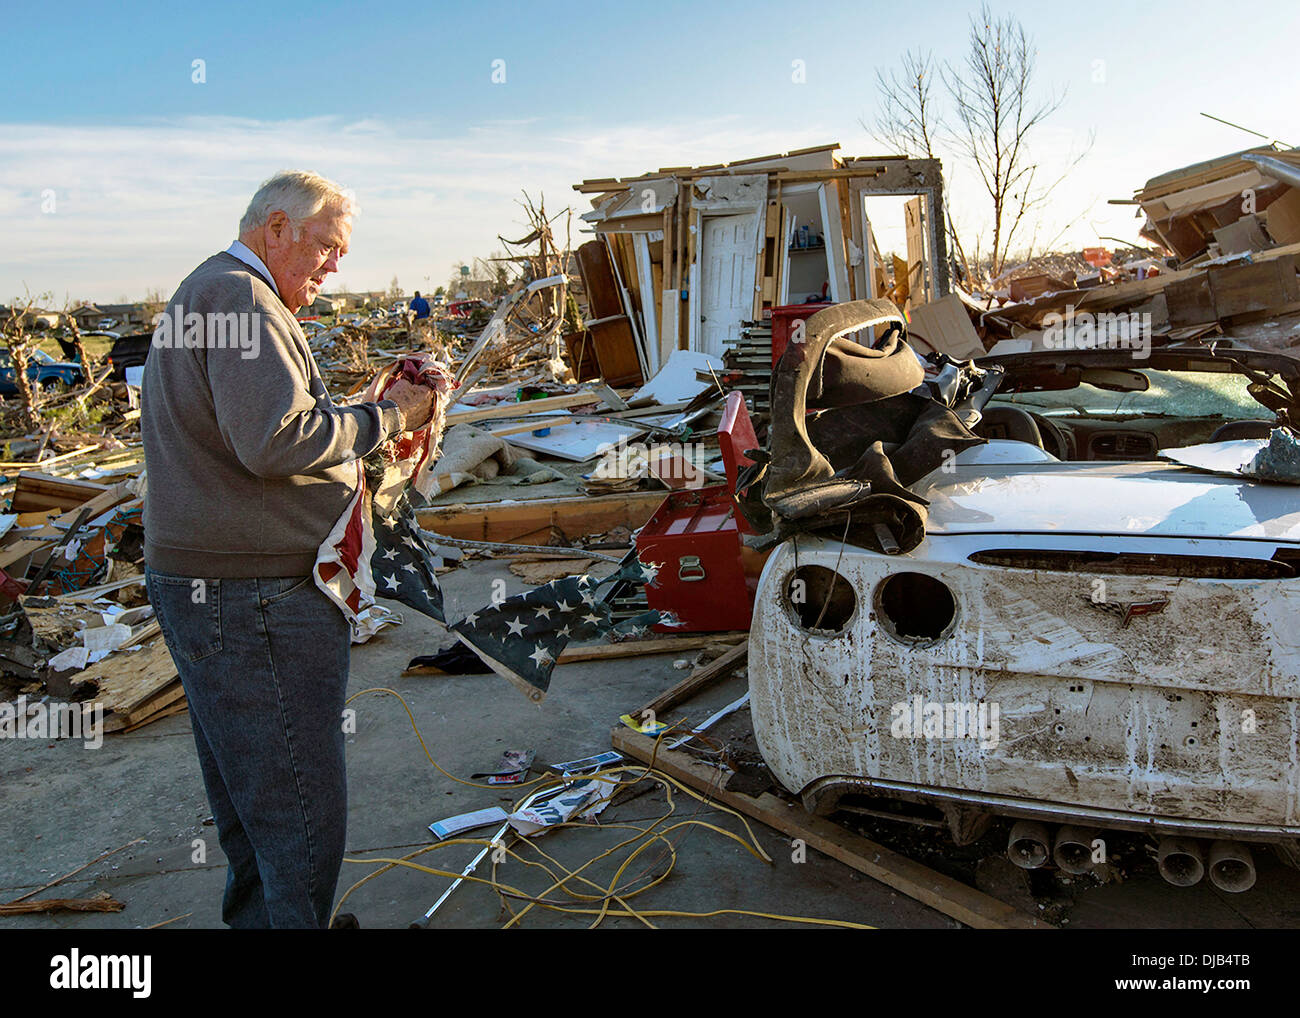 A resident recovers an American flag from his home destroyed by an EF-4 tornado November 19, 2013 in Washington, IL. The tornado left a path of destruction that stretched for more than 46 miles and damaged fourteen-hundred homes. Stock Photo